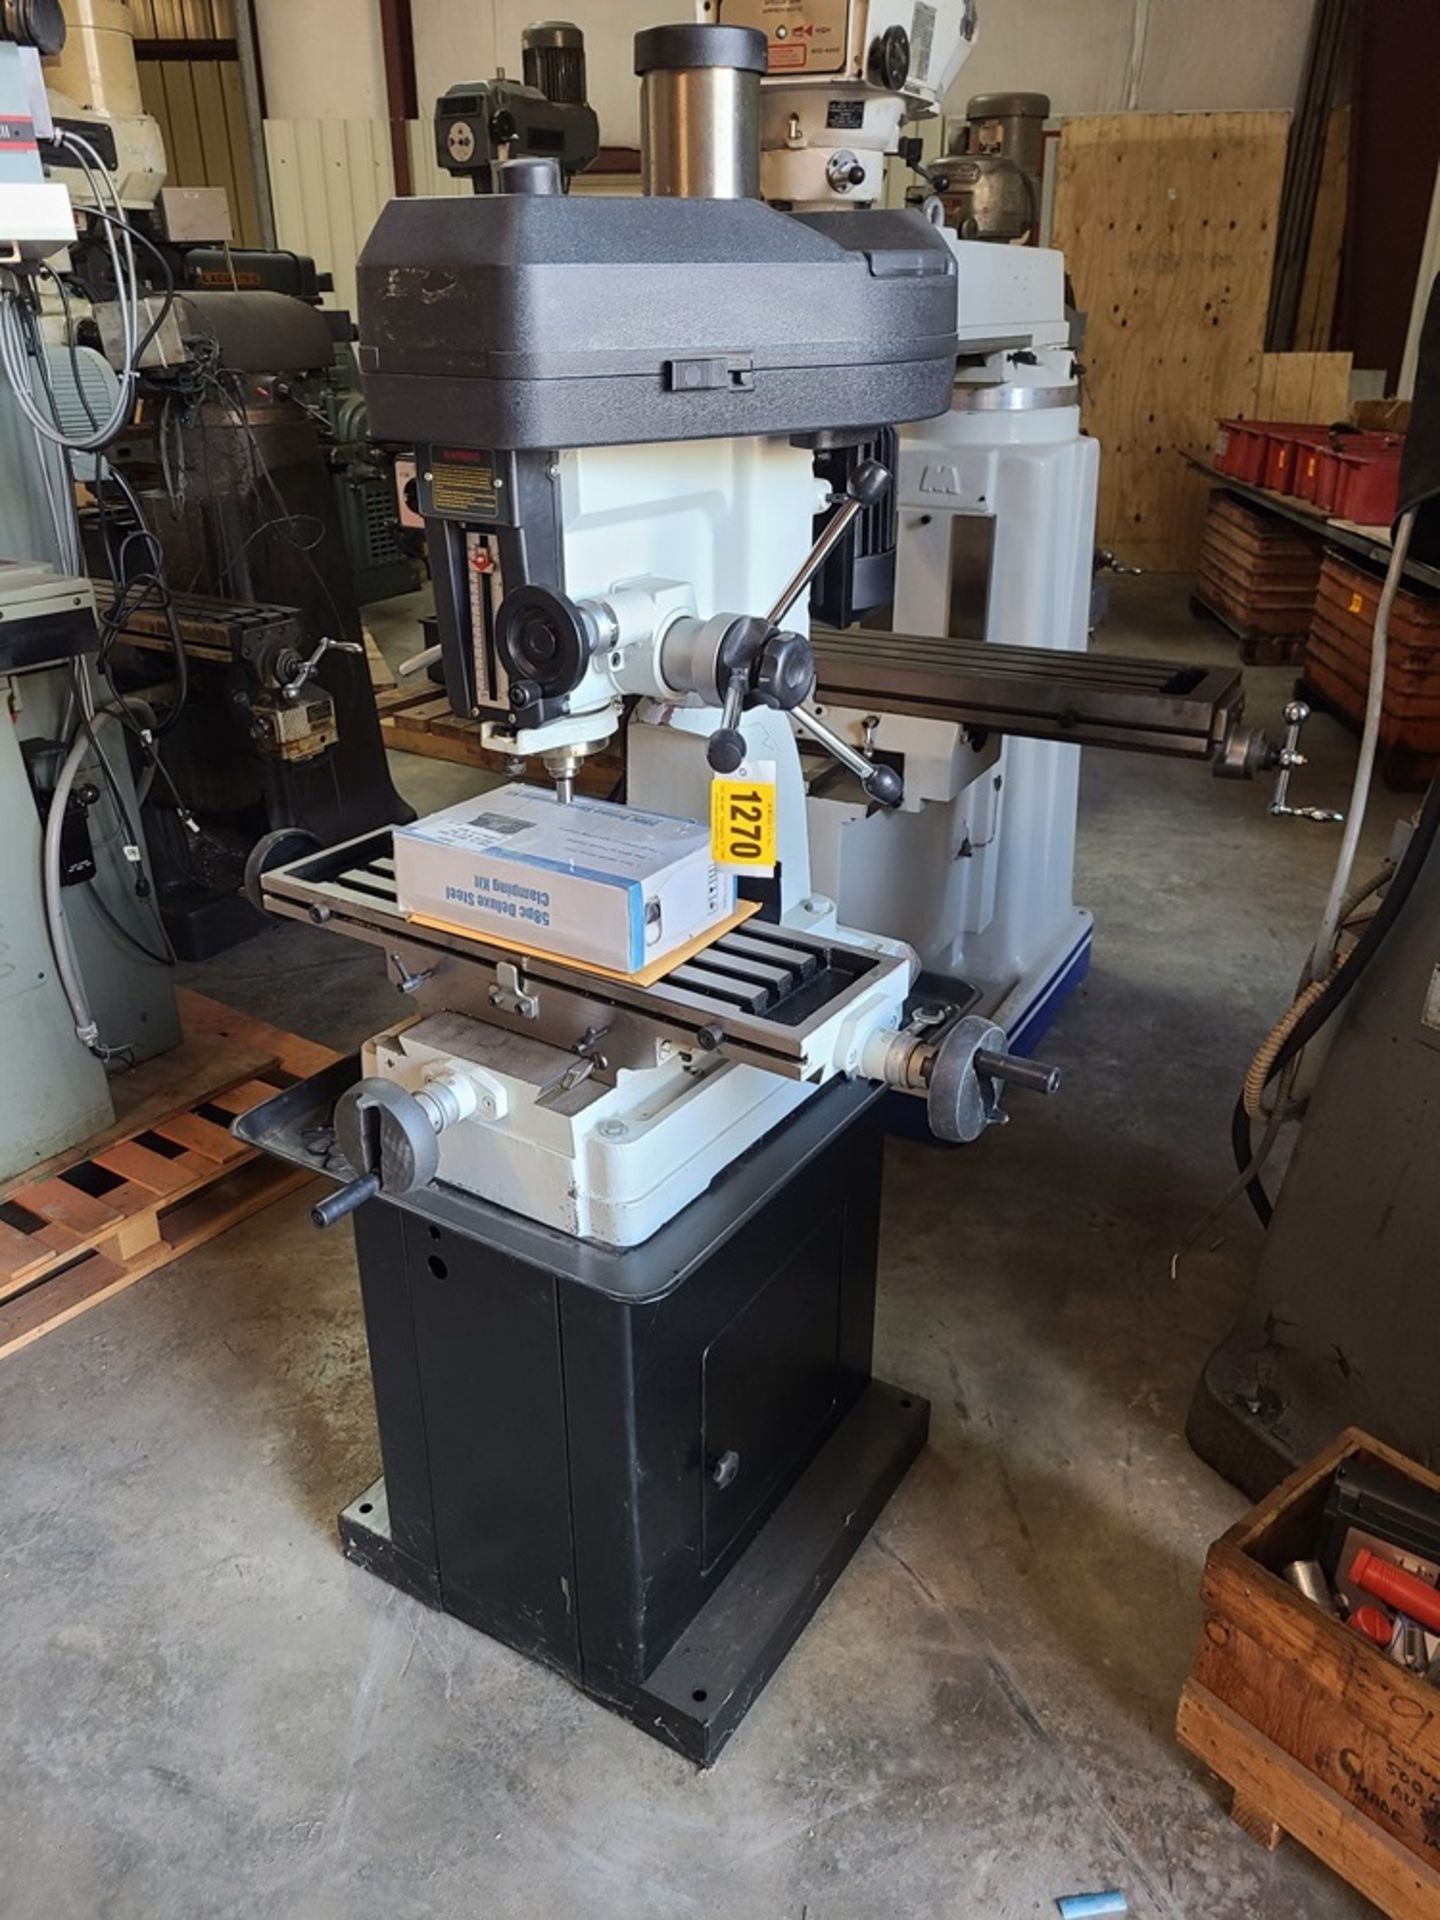 ACRA mill drill machine - MODEL RF-31 - 9" X 29" table, R-8 spindle, single phase, with cabinet